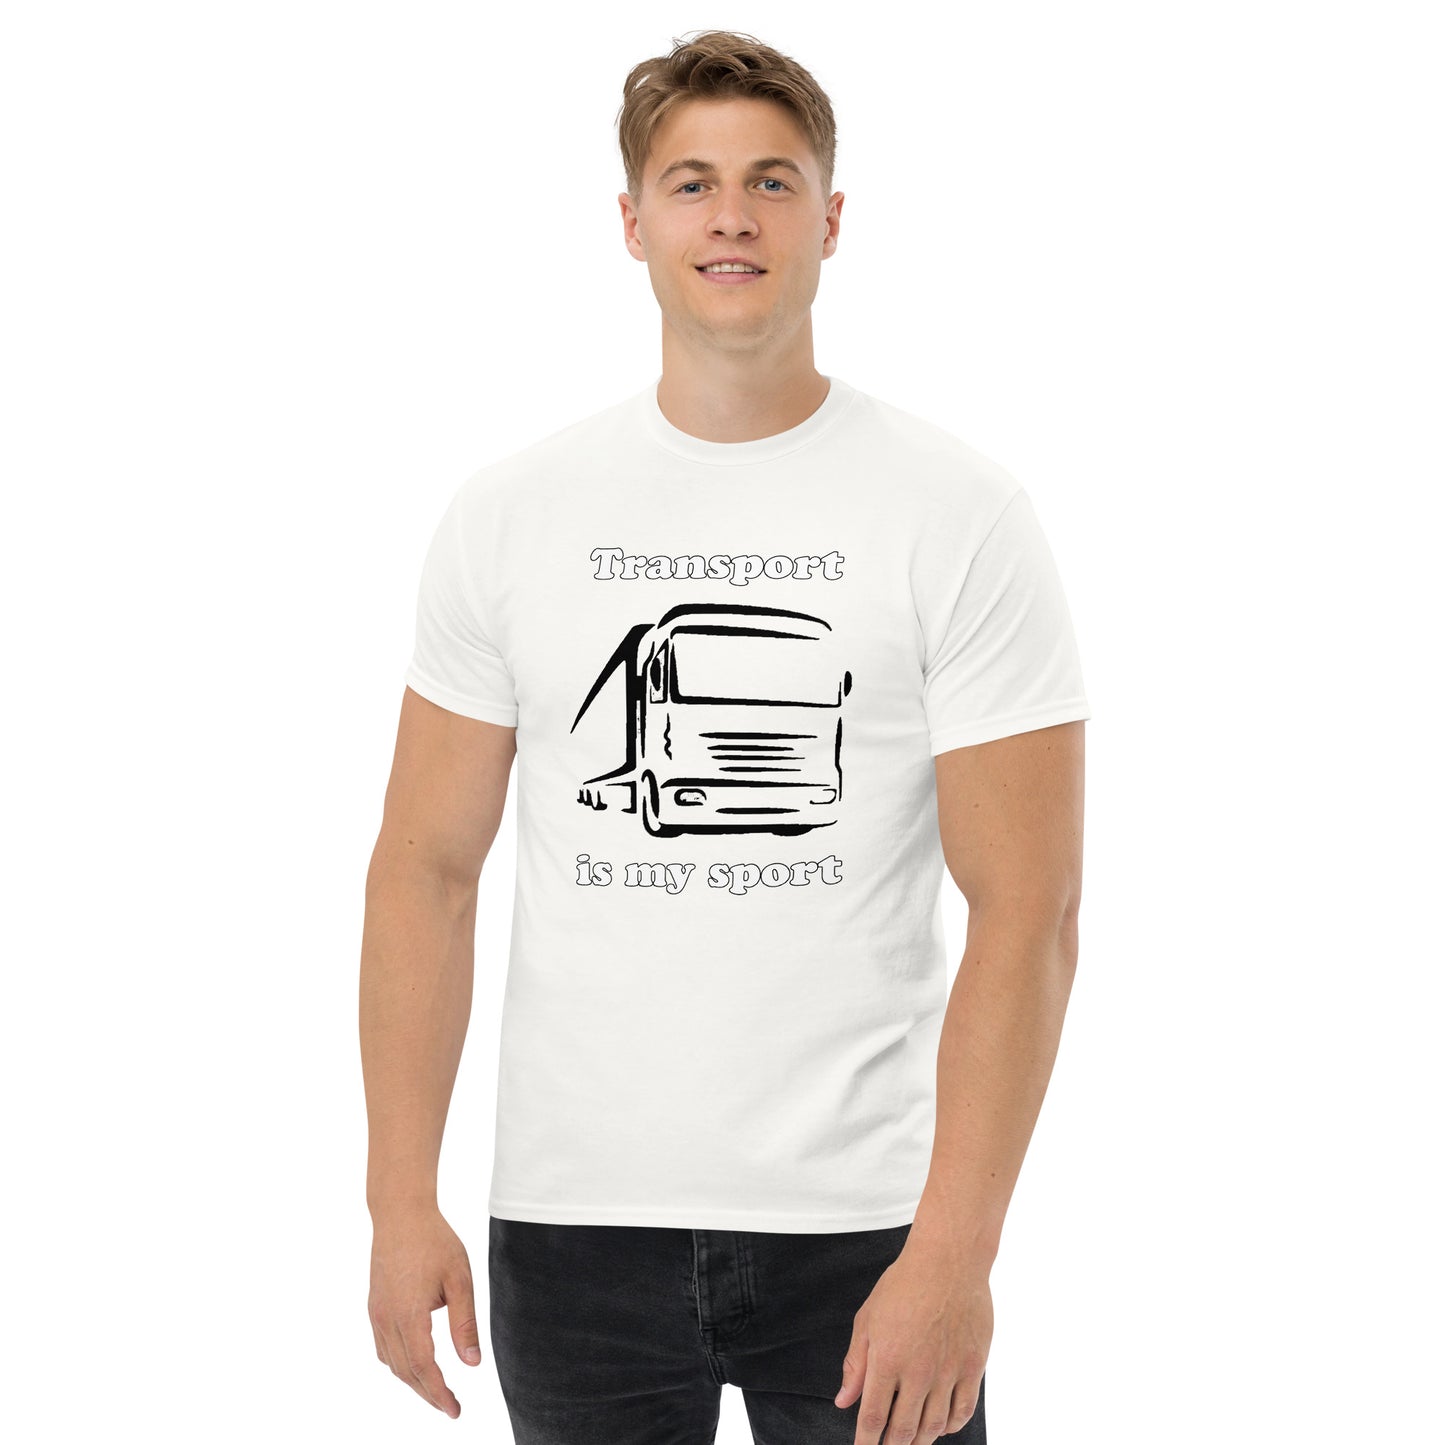 Man with white t-shirt with picture of truck and text "Transport is my sport"